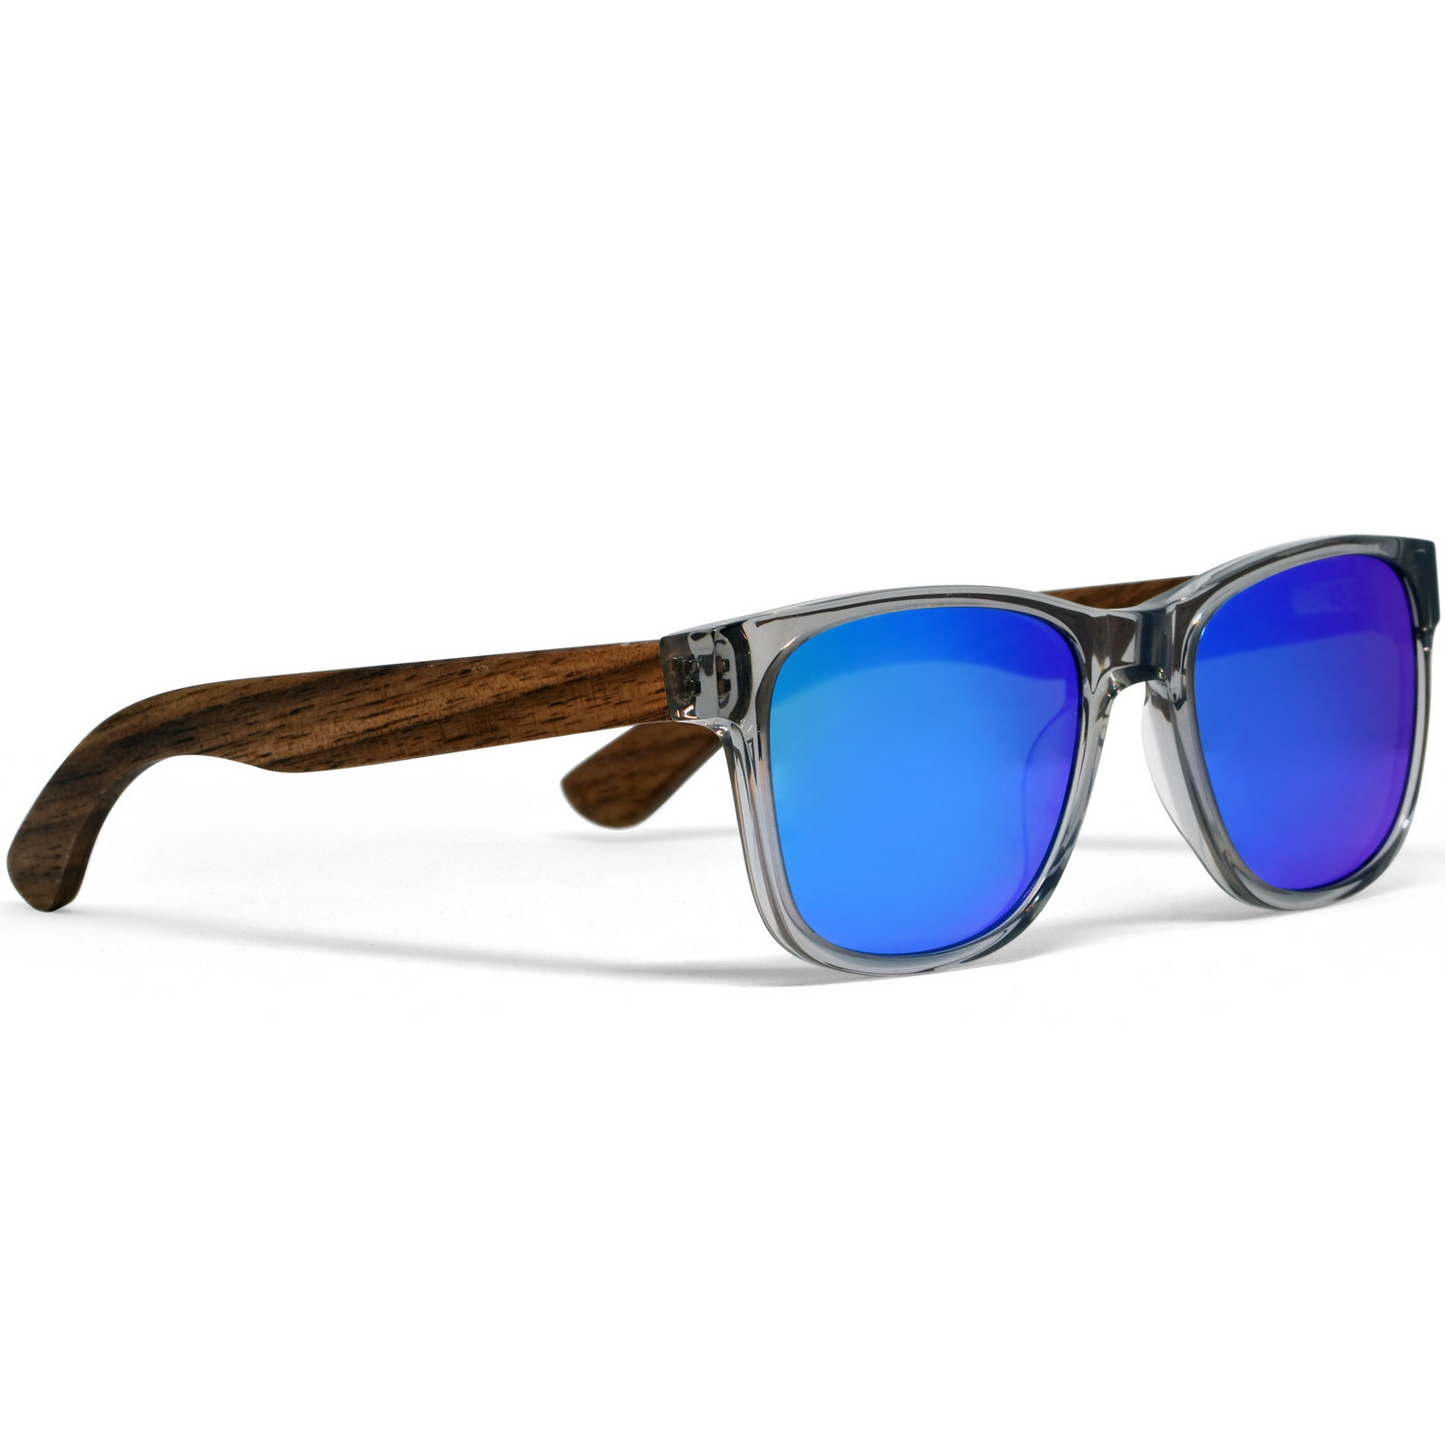 Walnut wood classic style sunglasses with semi-transparent grey frame and blue mirrored polarized lenses